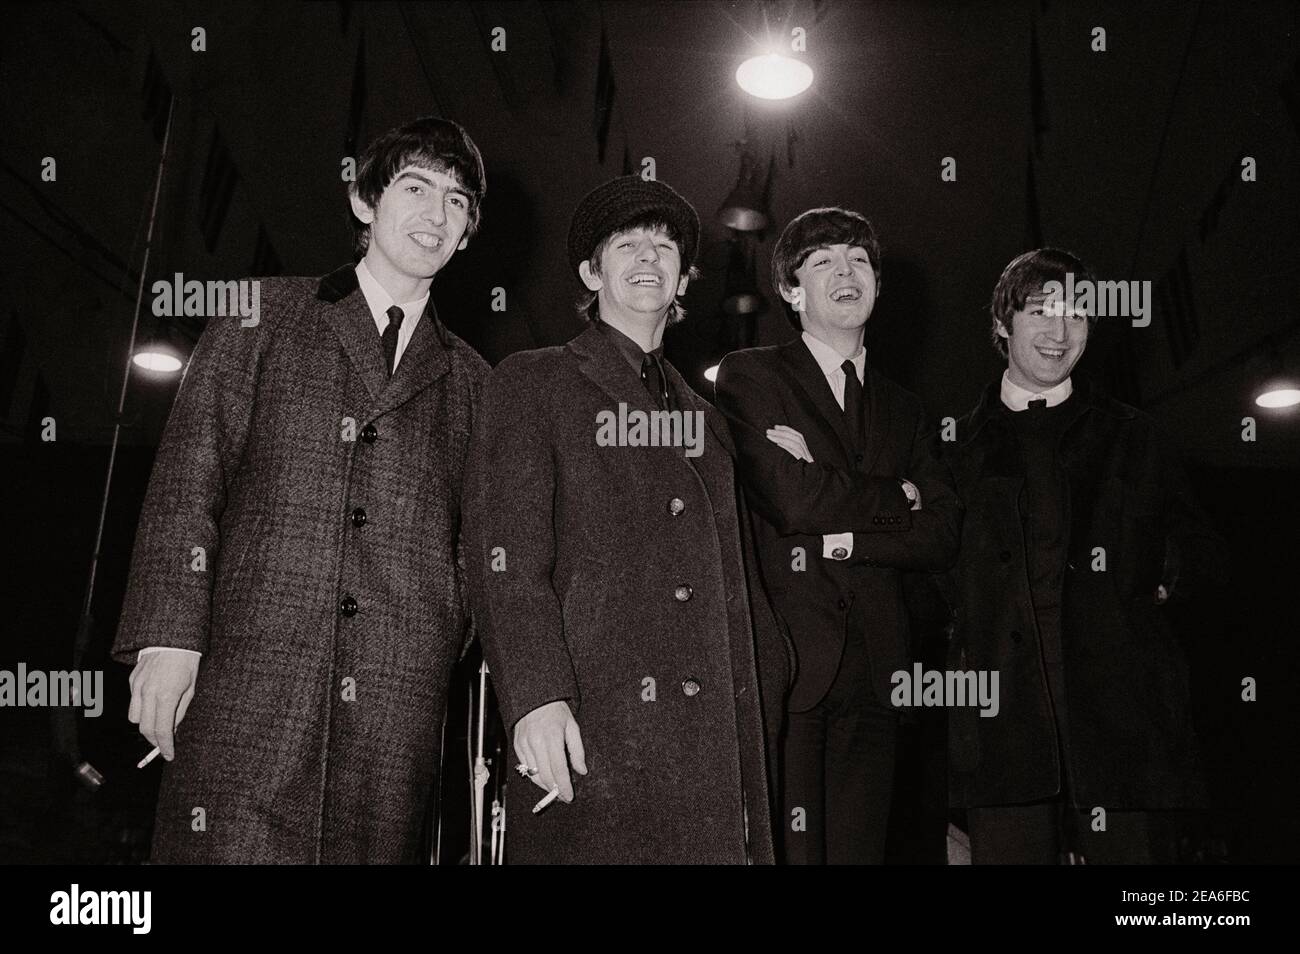 The Beatles arriving and press conference (British rock & rollers). USA. February 11, 1964 Stock Photo